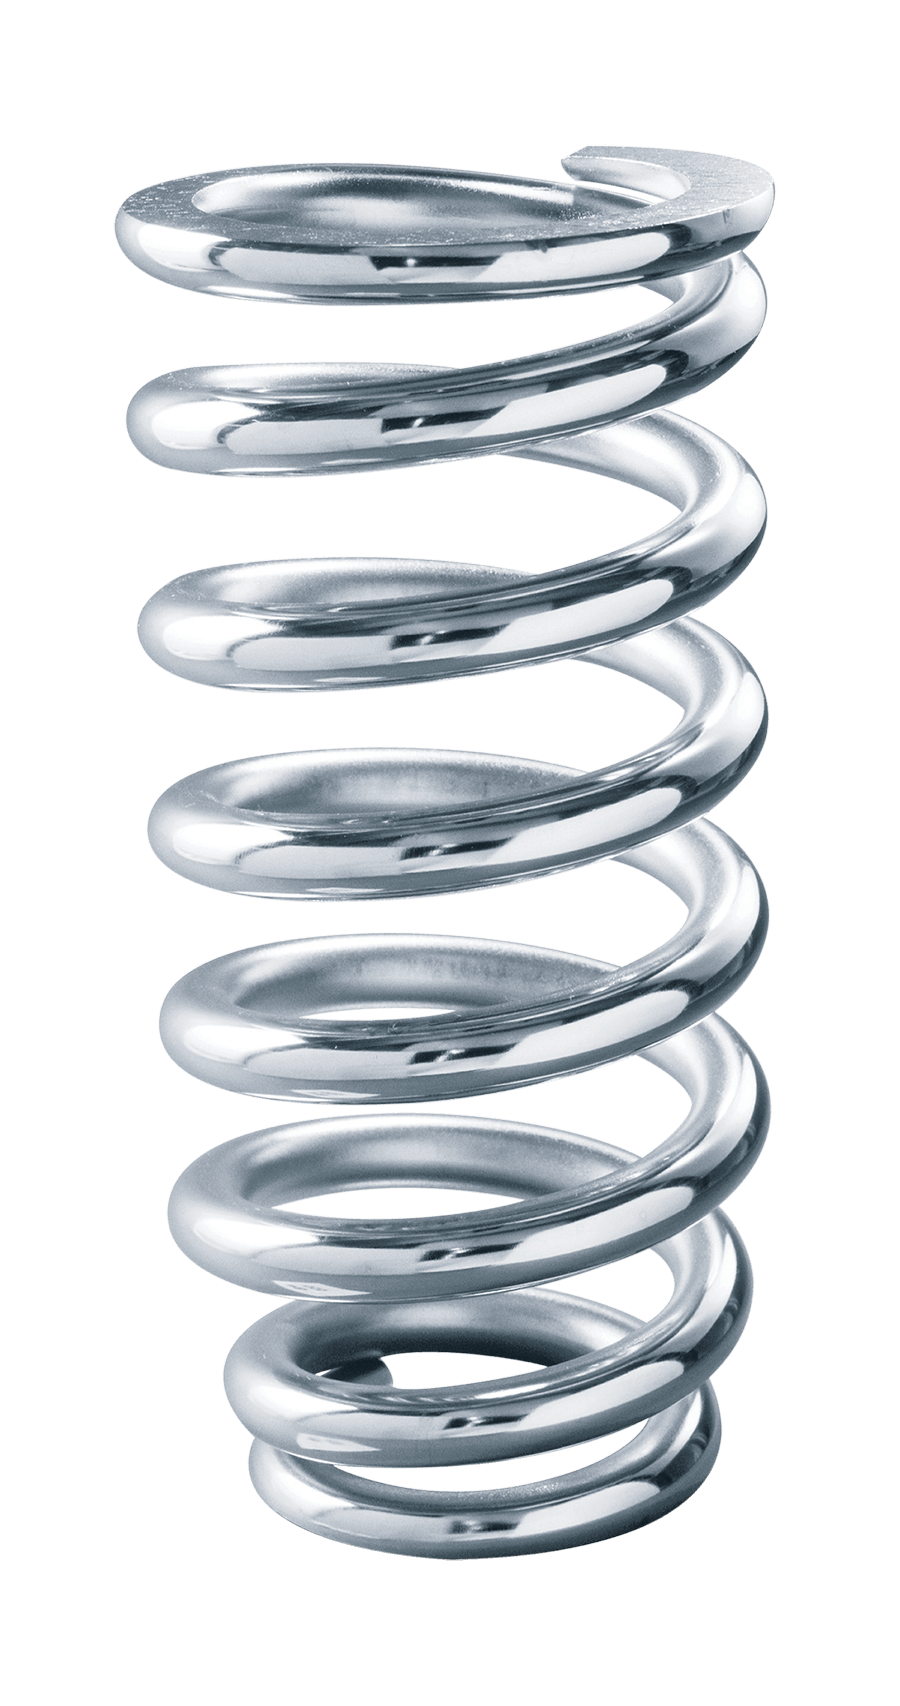 QA1 8MB700 Spring Chrome Silicon 3-1/2 Id 8-700 Lbs Chrome Plated 1St Coil Tapered